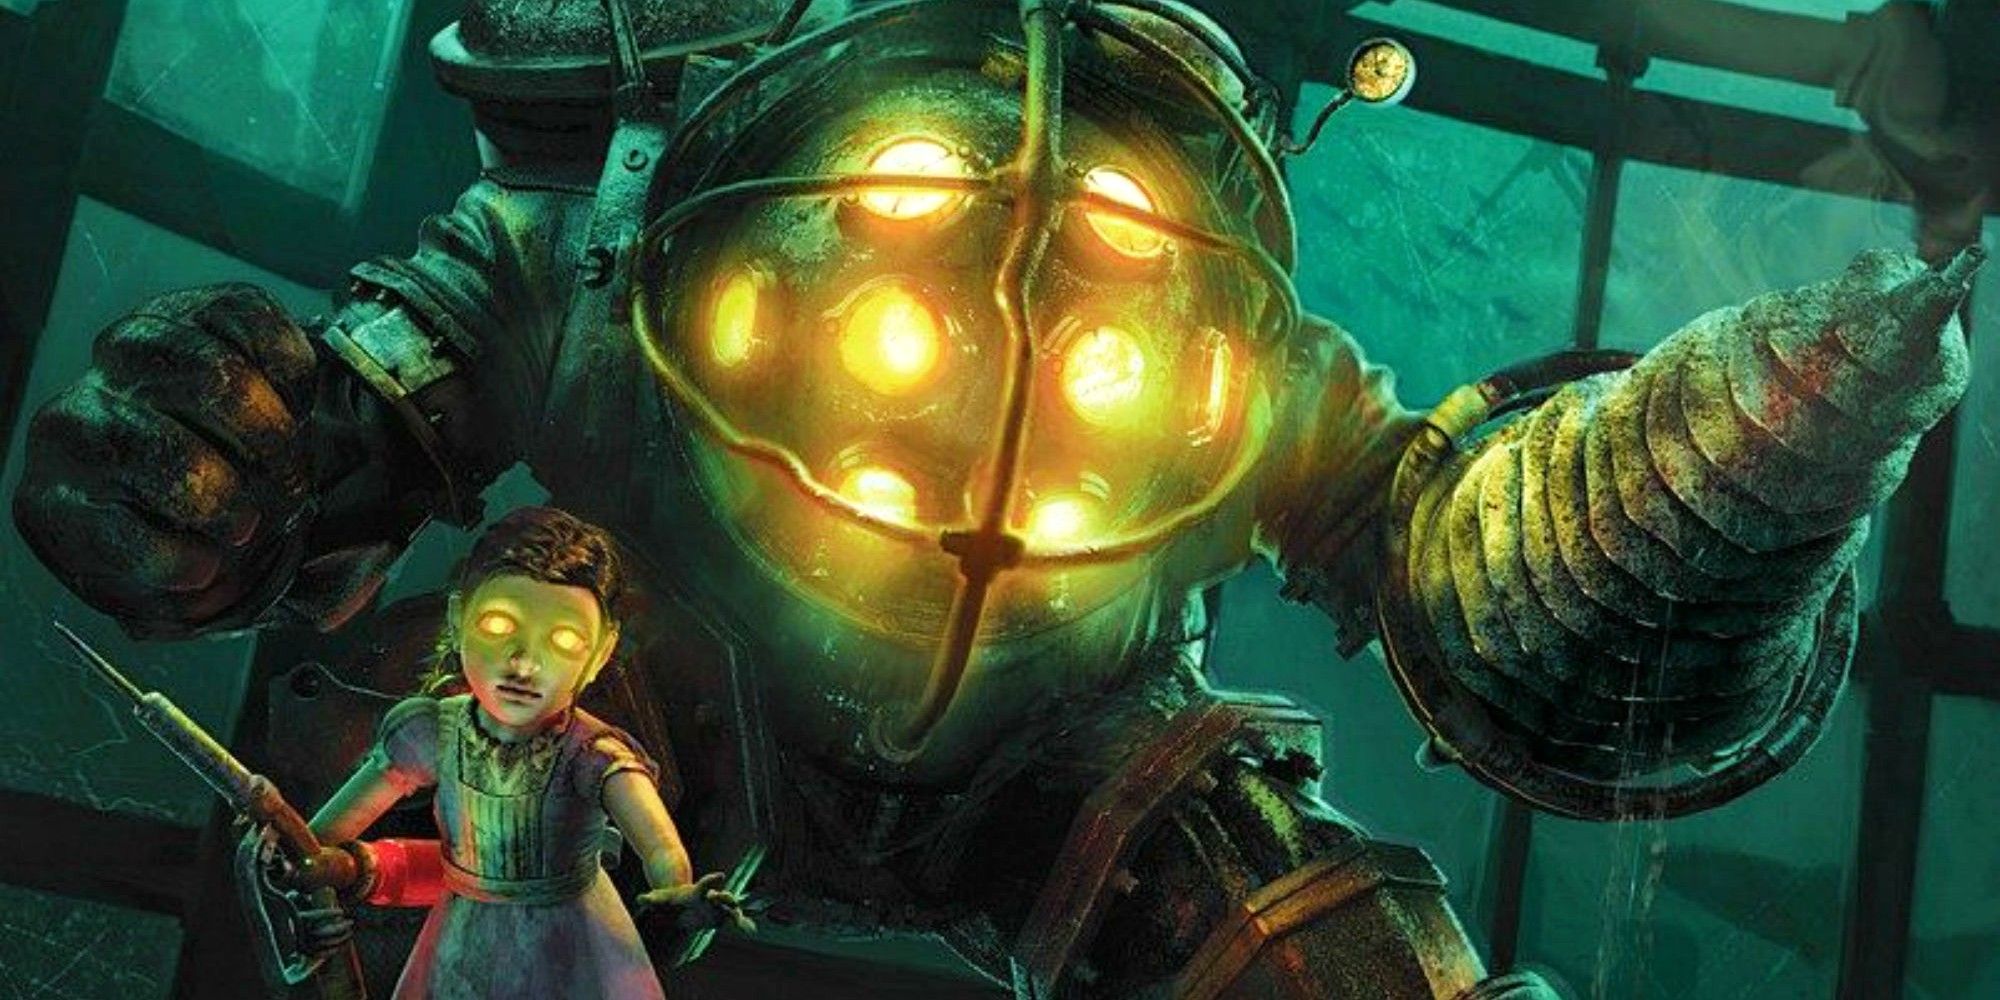 BioShock 4 needs to bring back Big Daddies and Little Sisters